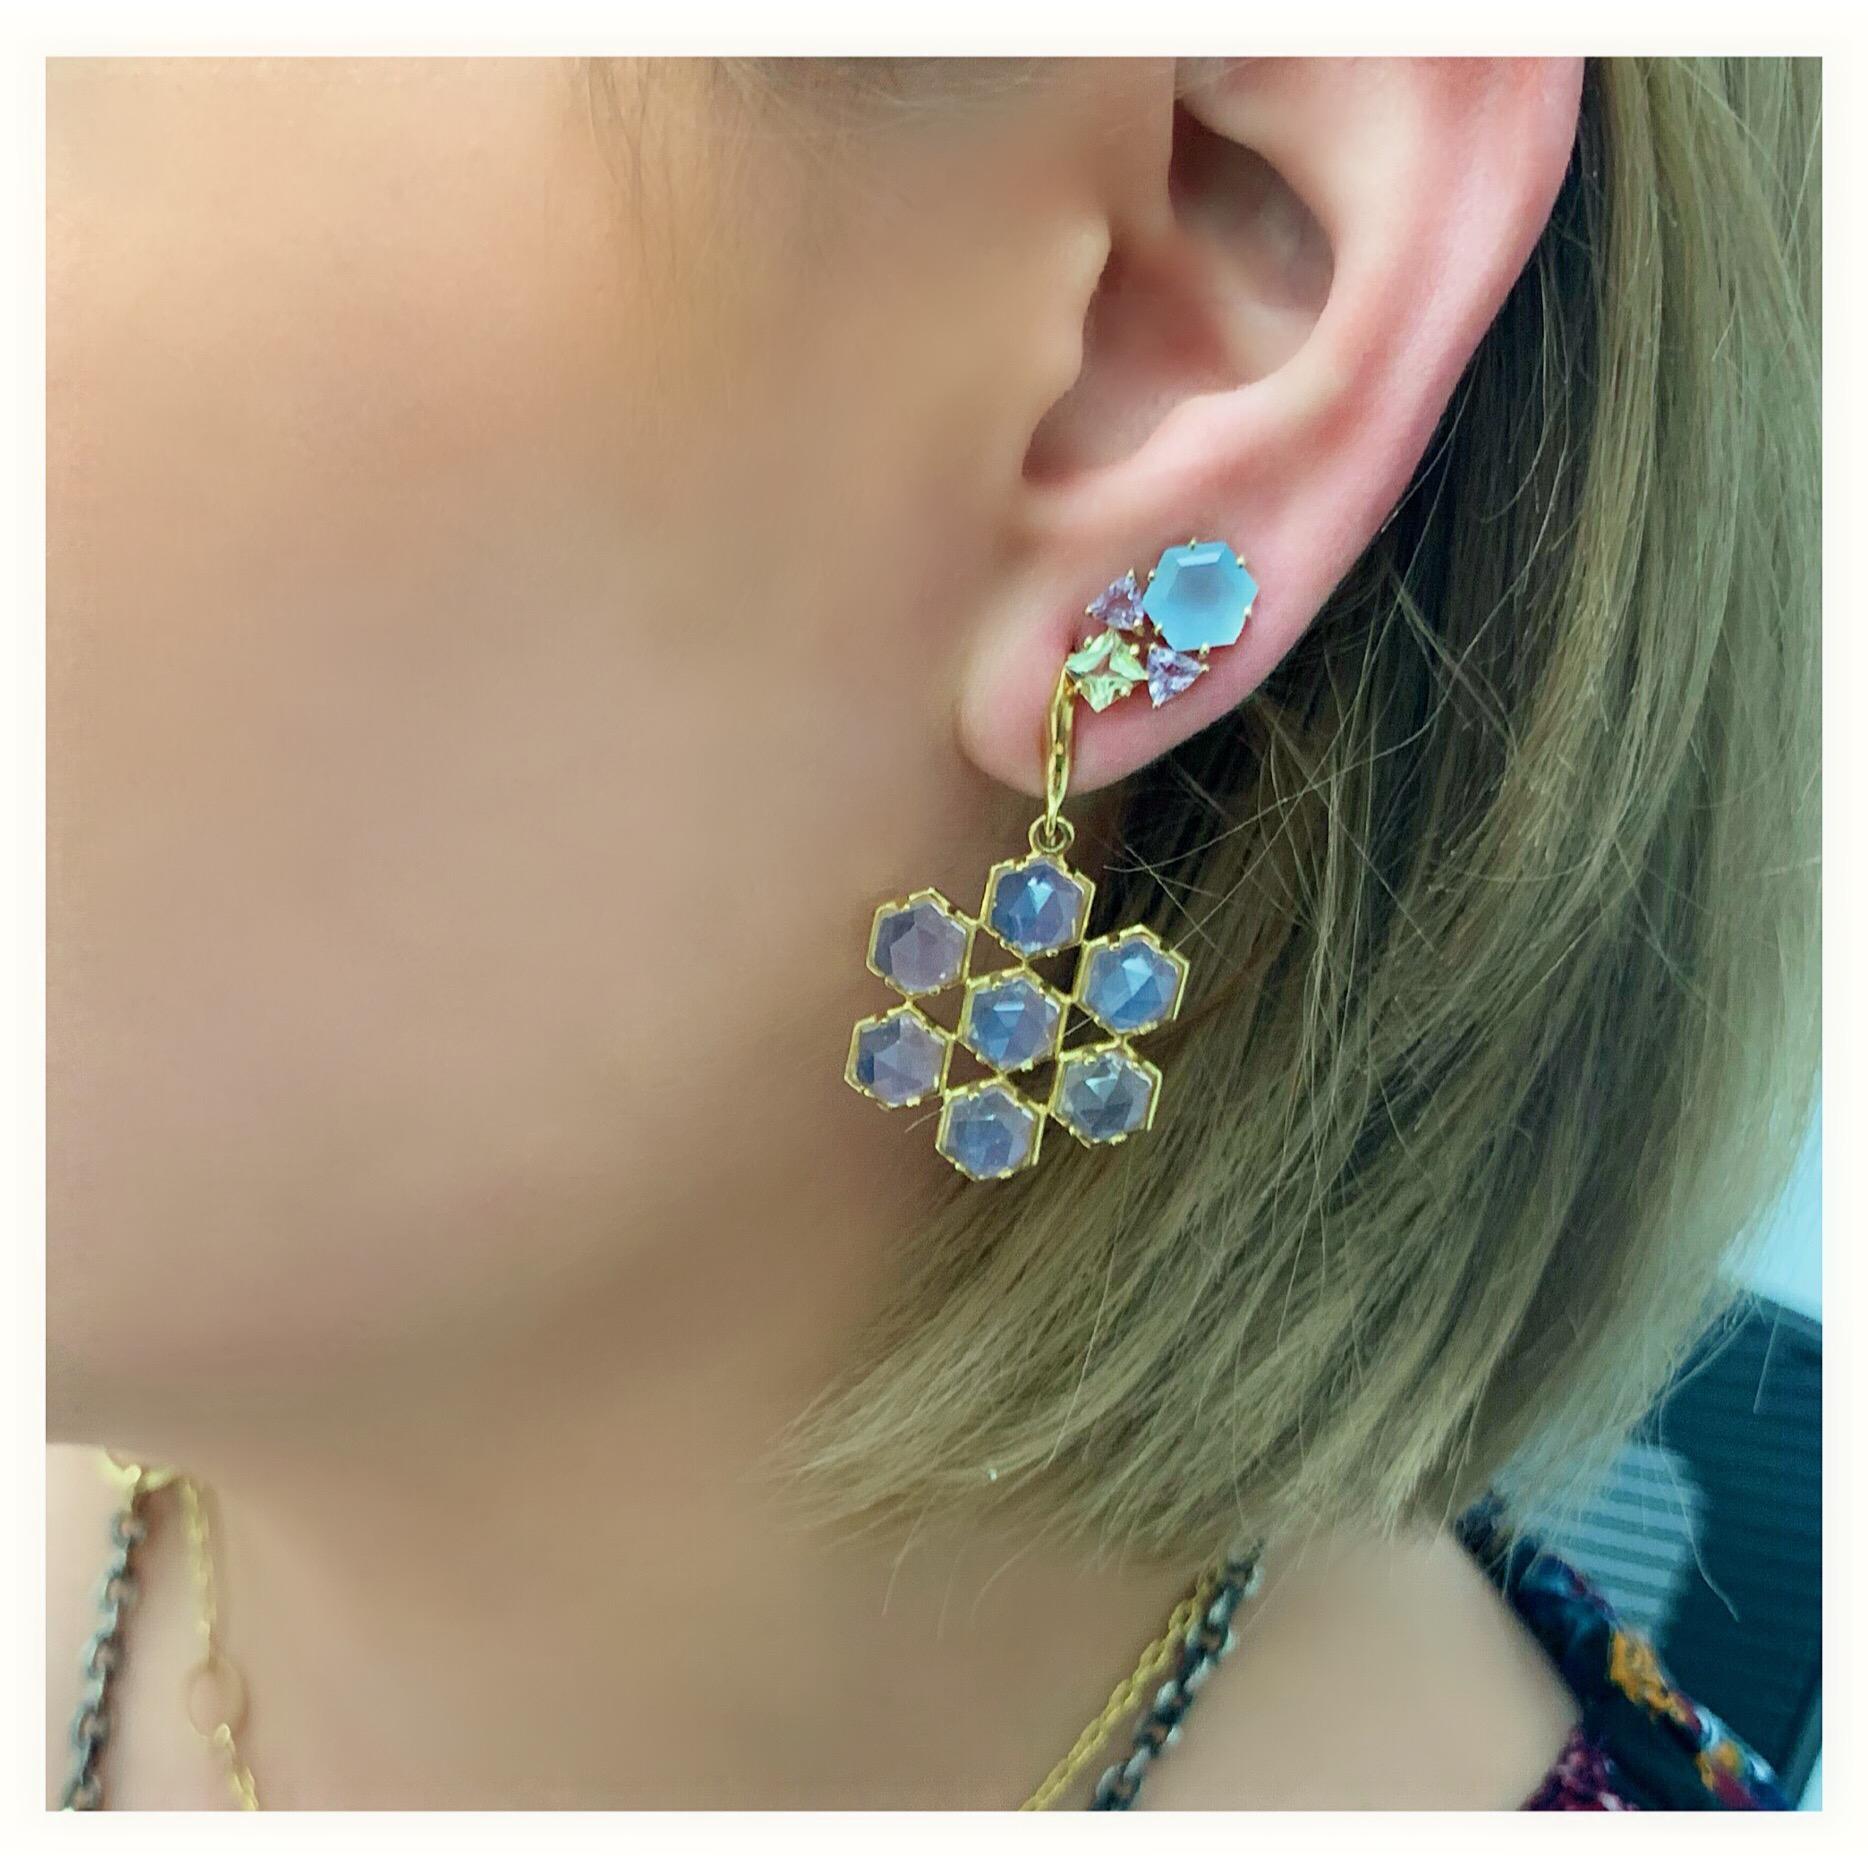 Rose cut Lavender Moonstones are luminous when set in this classical geometric pattern.  The large drop hangs off of a graceful sculptural ear wire.
Materials: 18 Karat Gold, 5mm Rose Cut Lavender Moonstones
38mm x 28mm